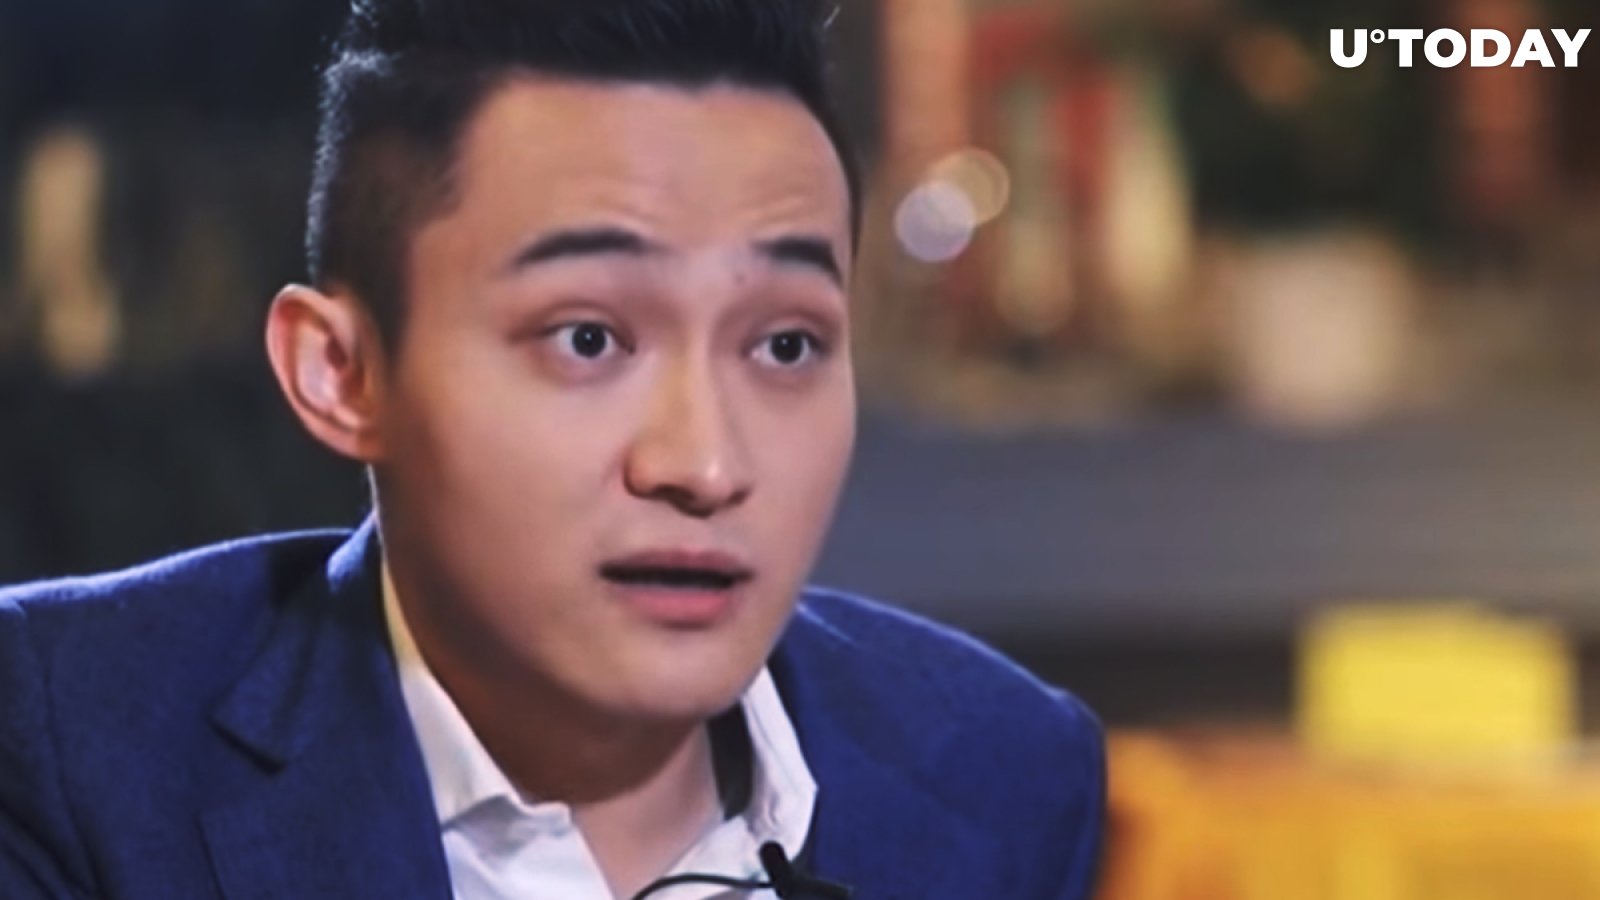 Tron CEO Justin Sun Has His Account Shut Down on Chinese Twitter